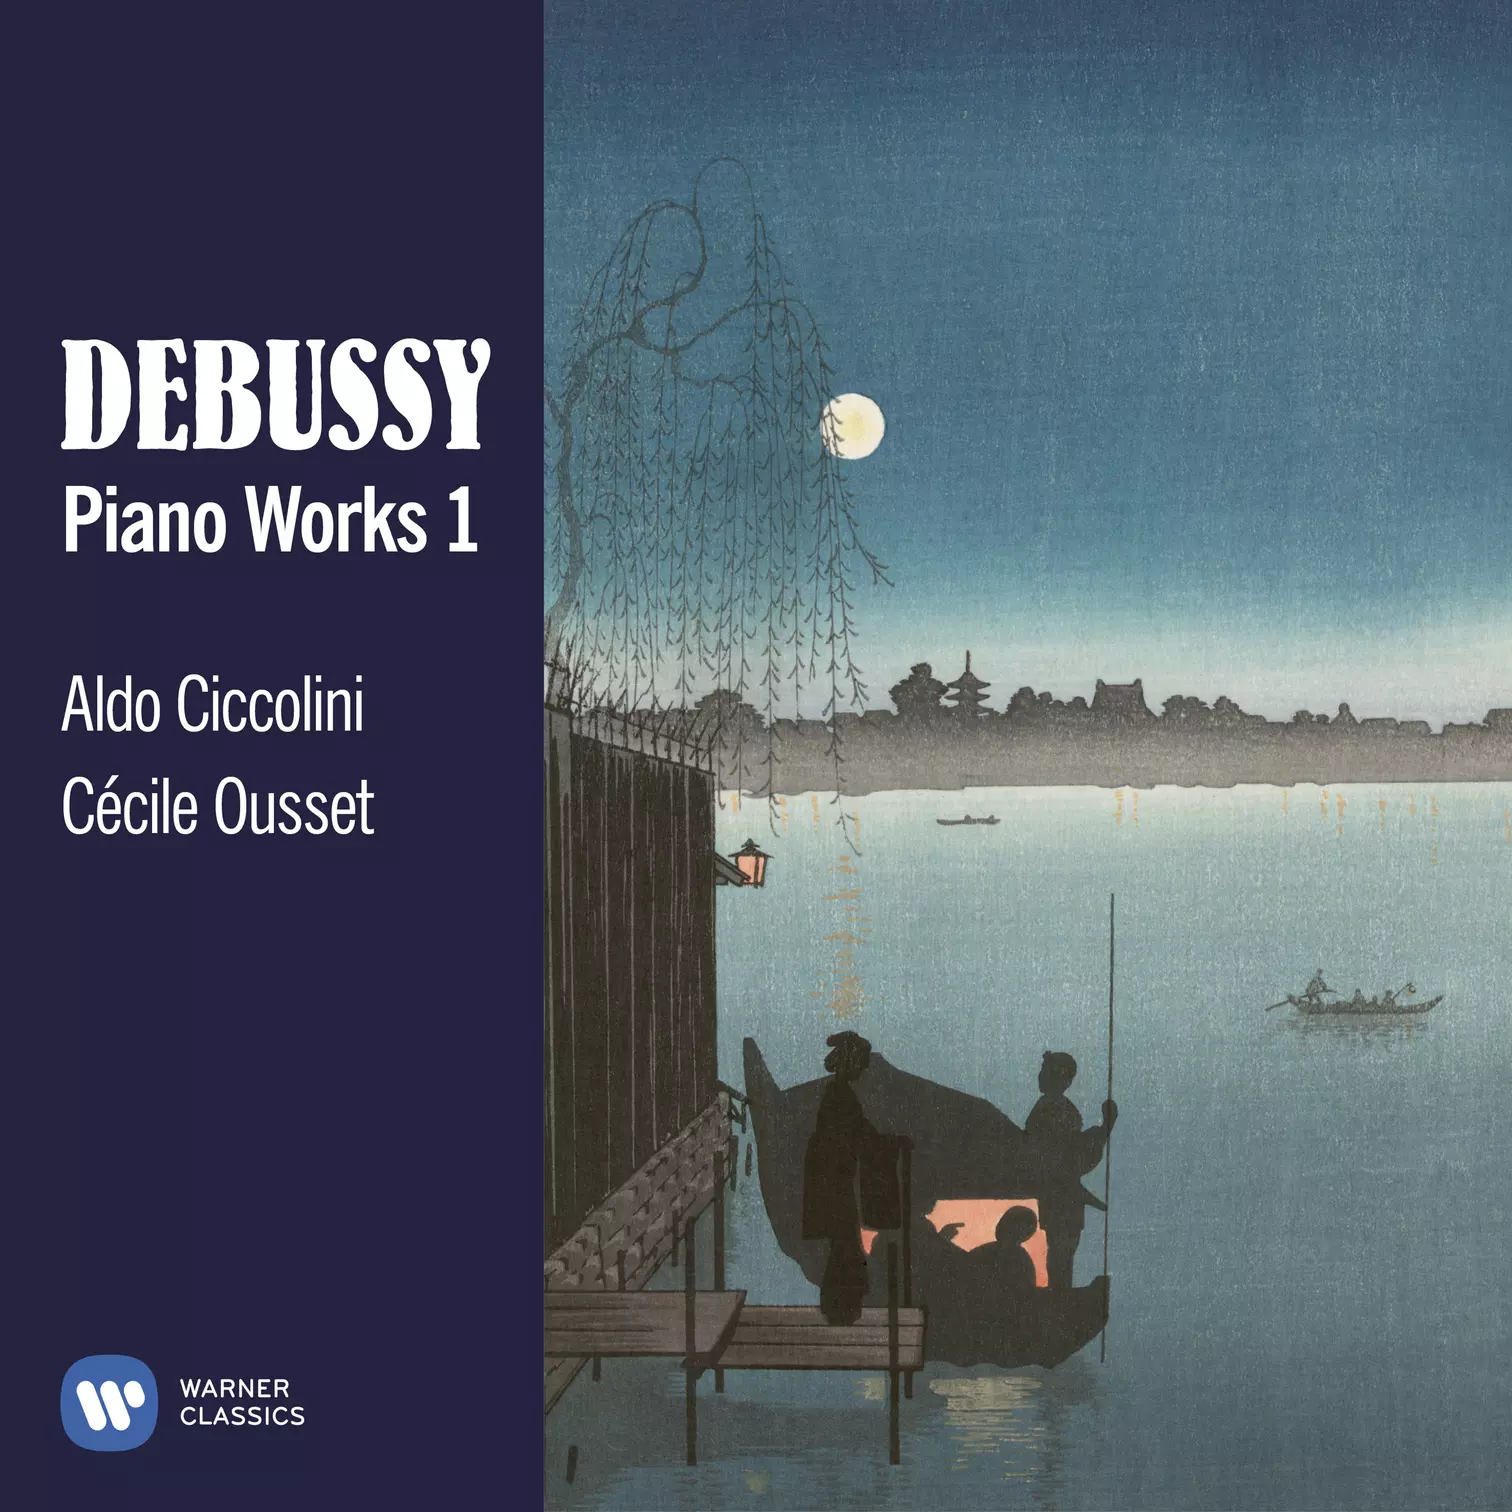 Debussy: Piano Works 1